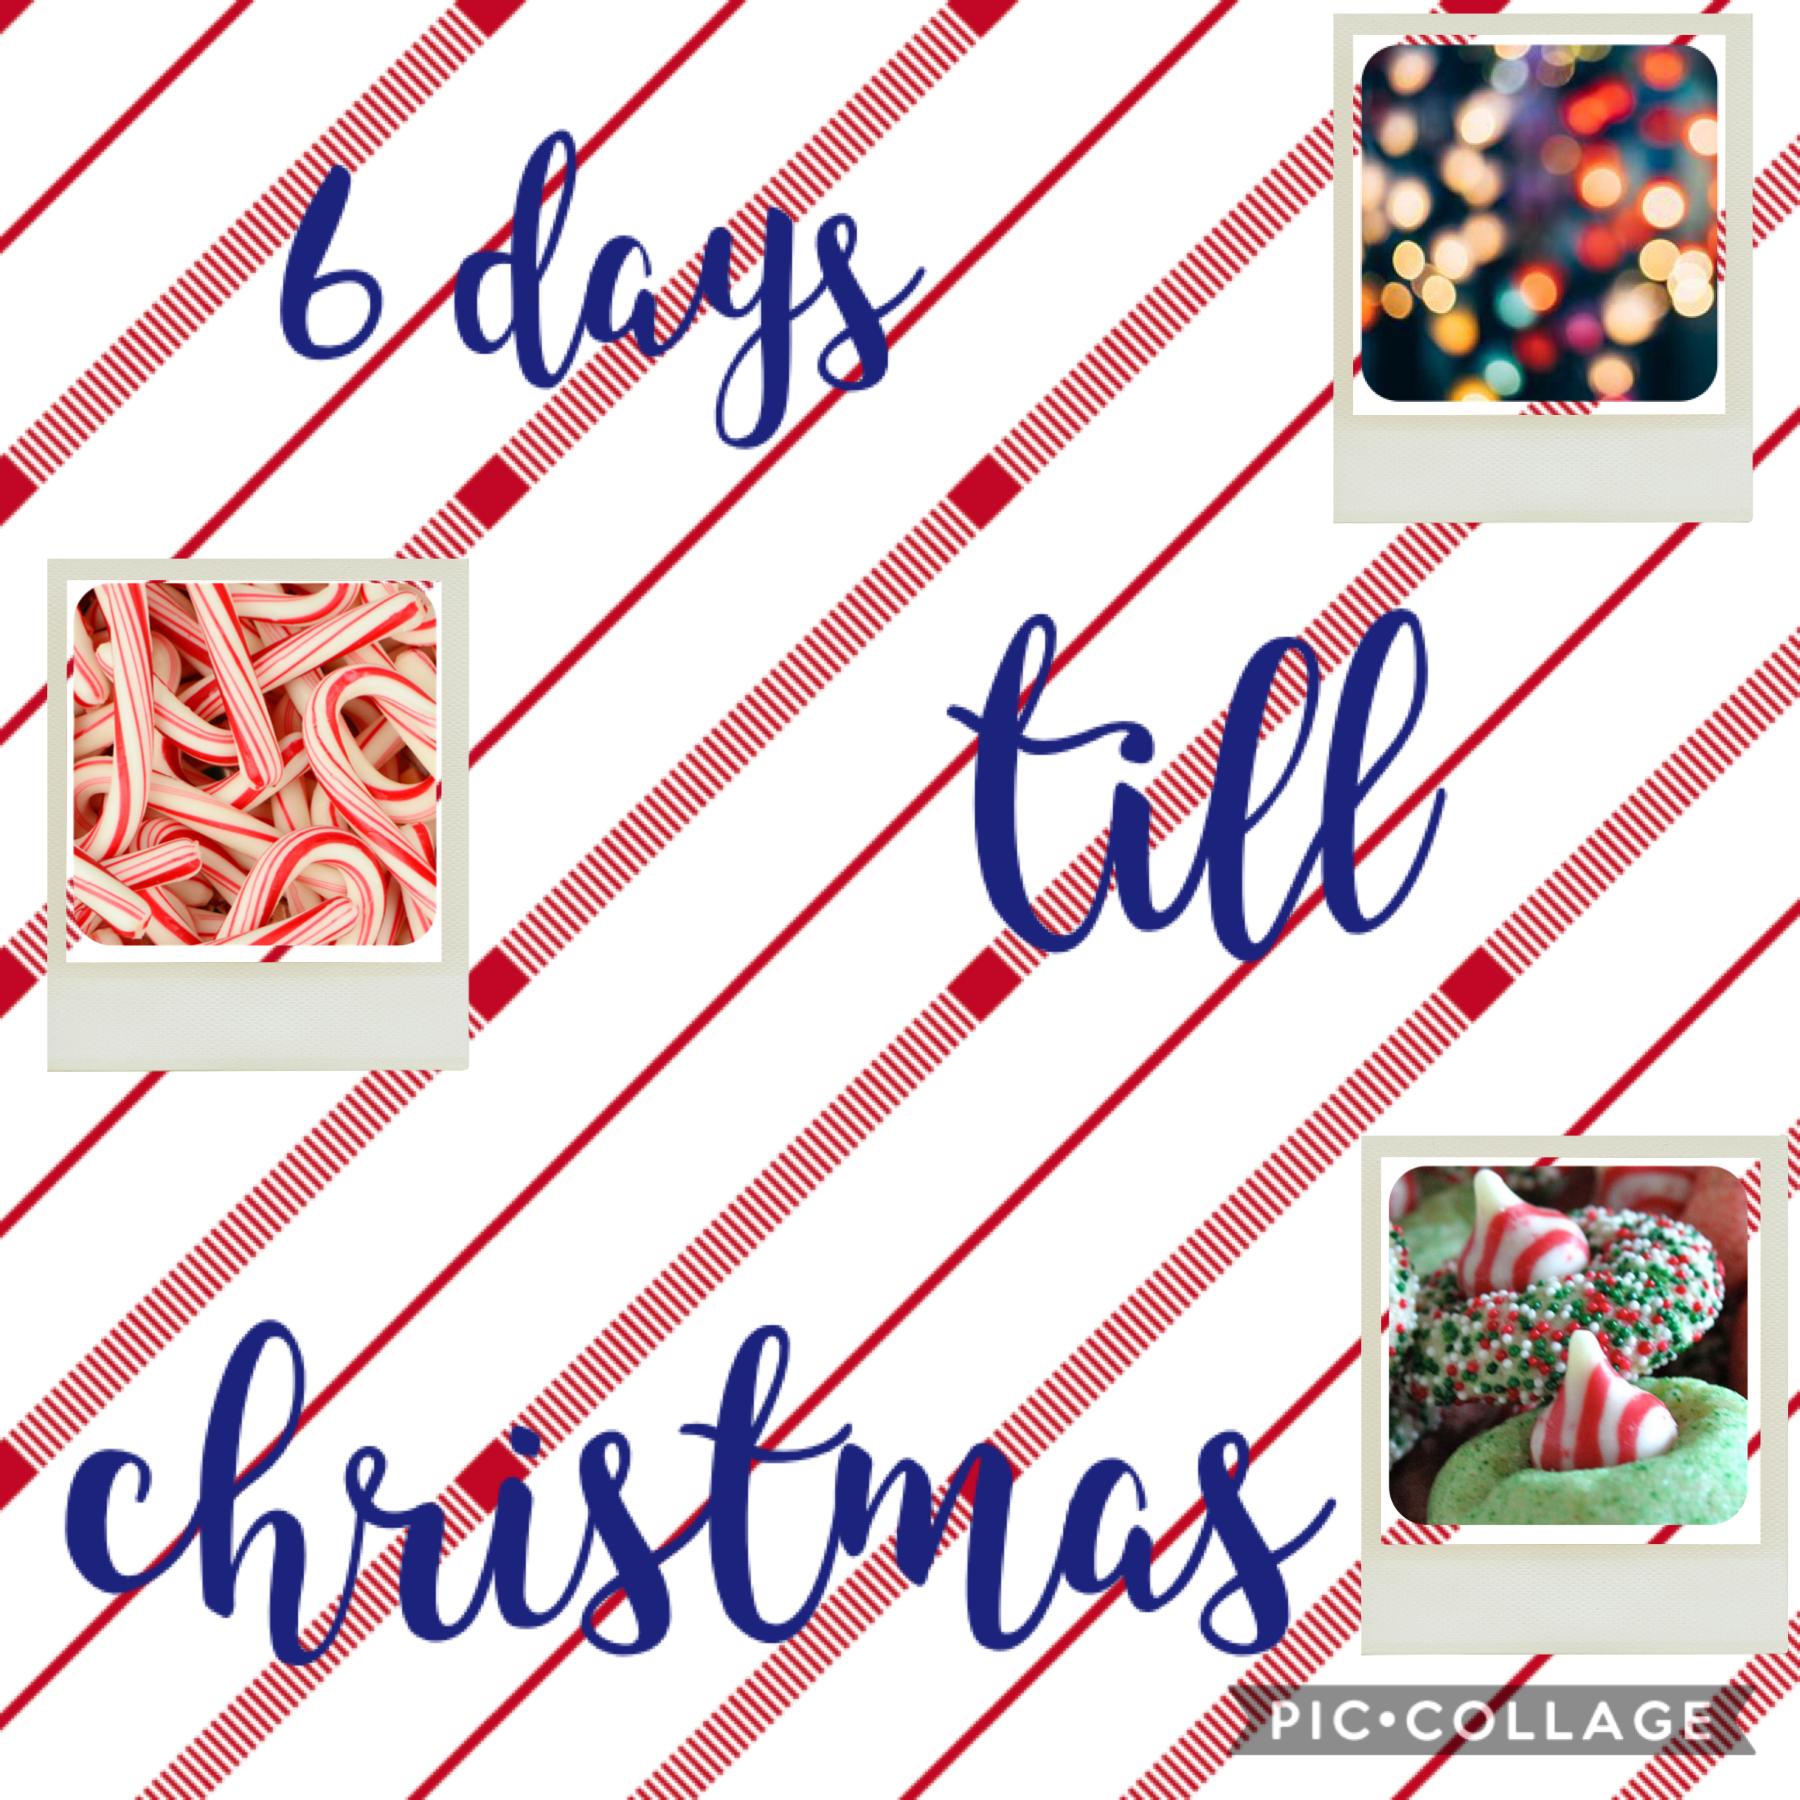 6 days till christmas i am so excited!!!